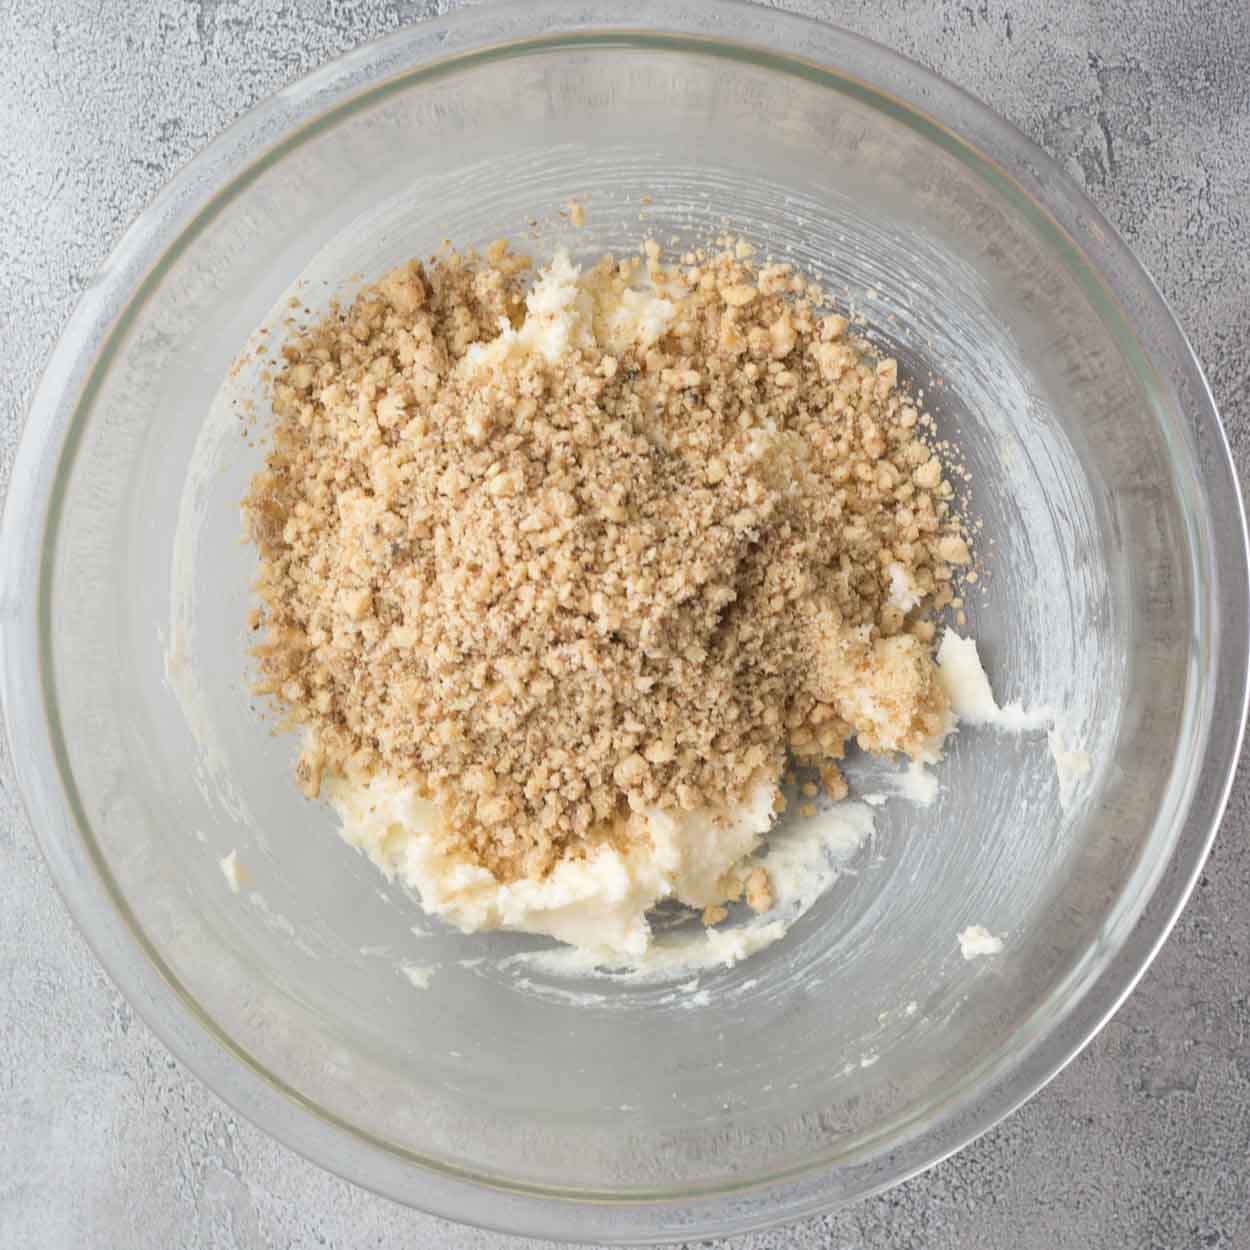 A glass bowl with the combined flour and nuts.